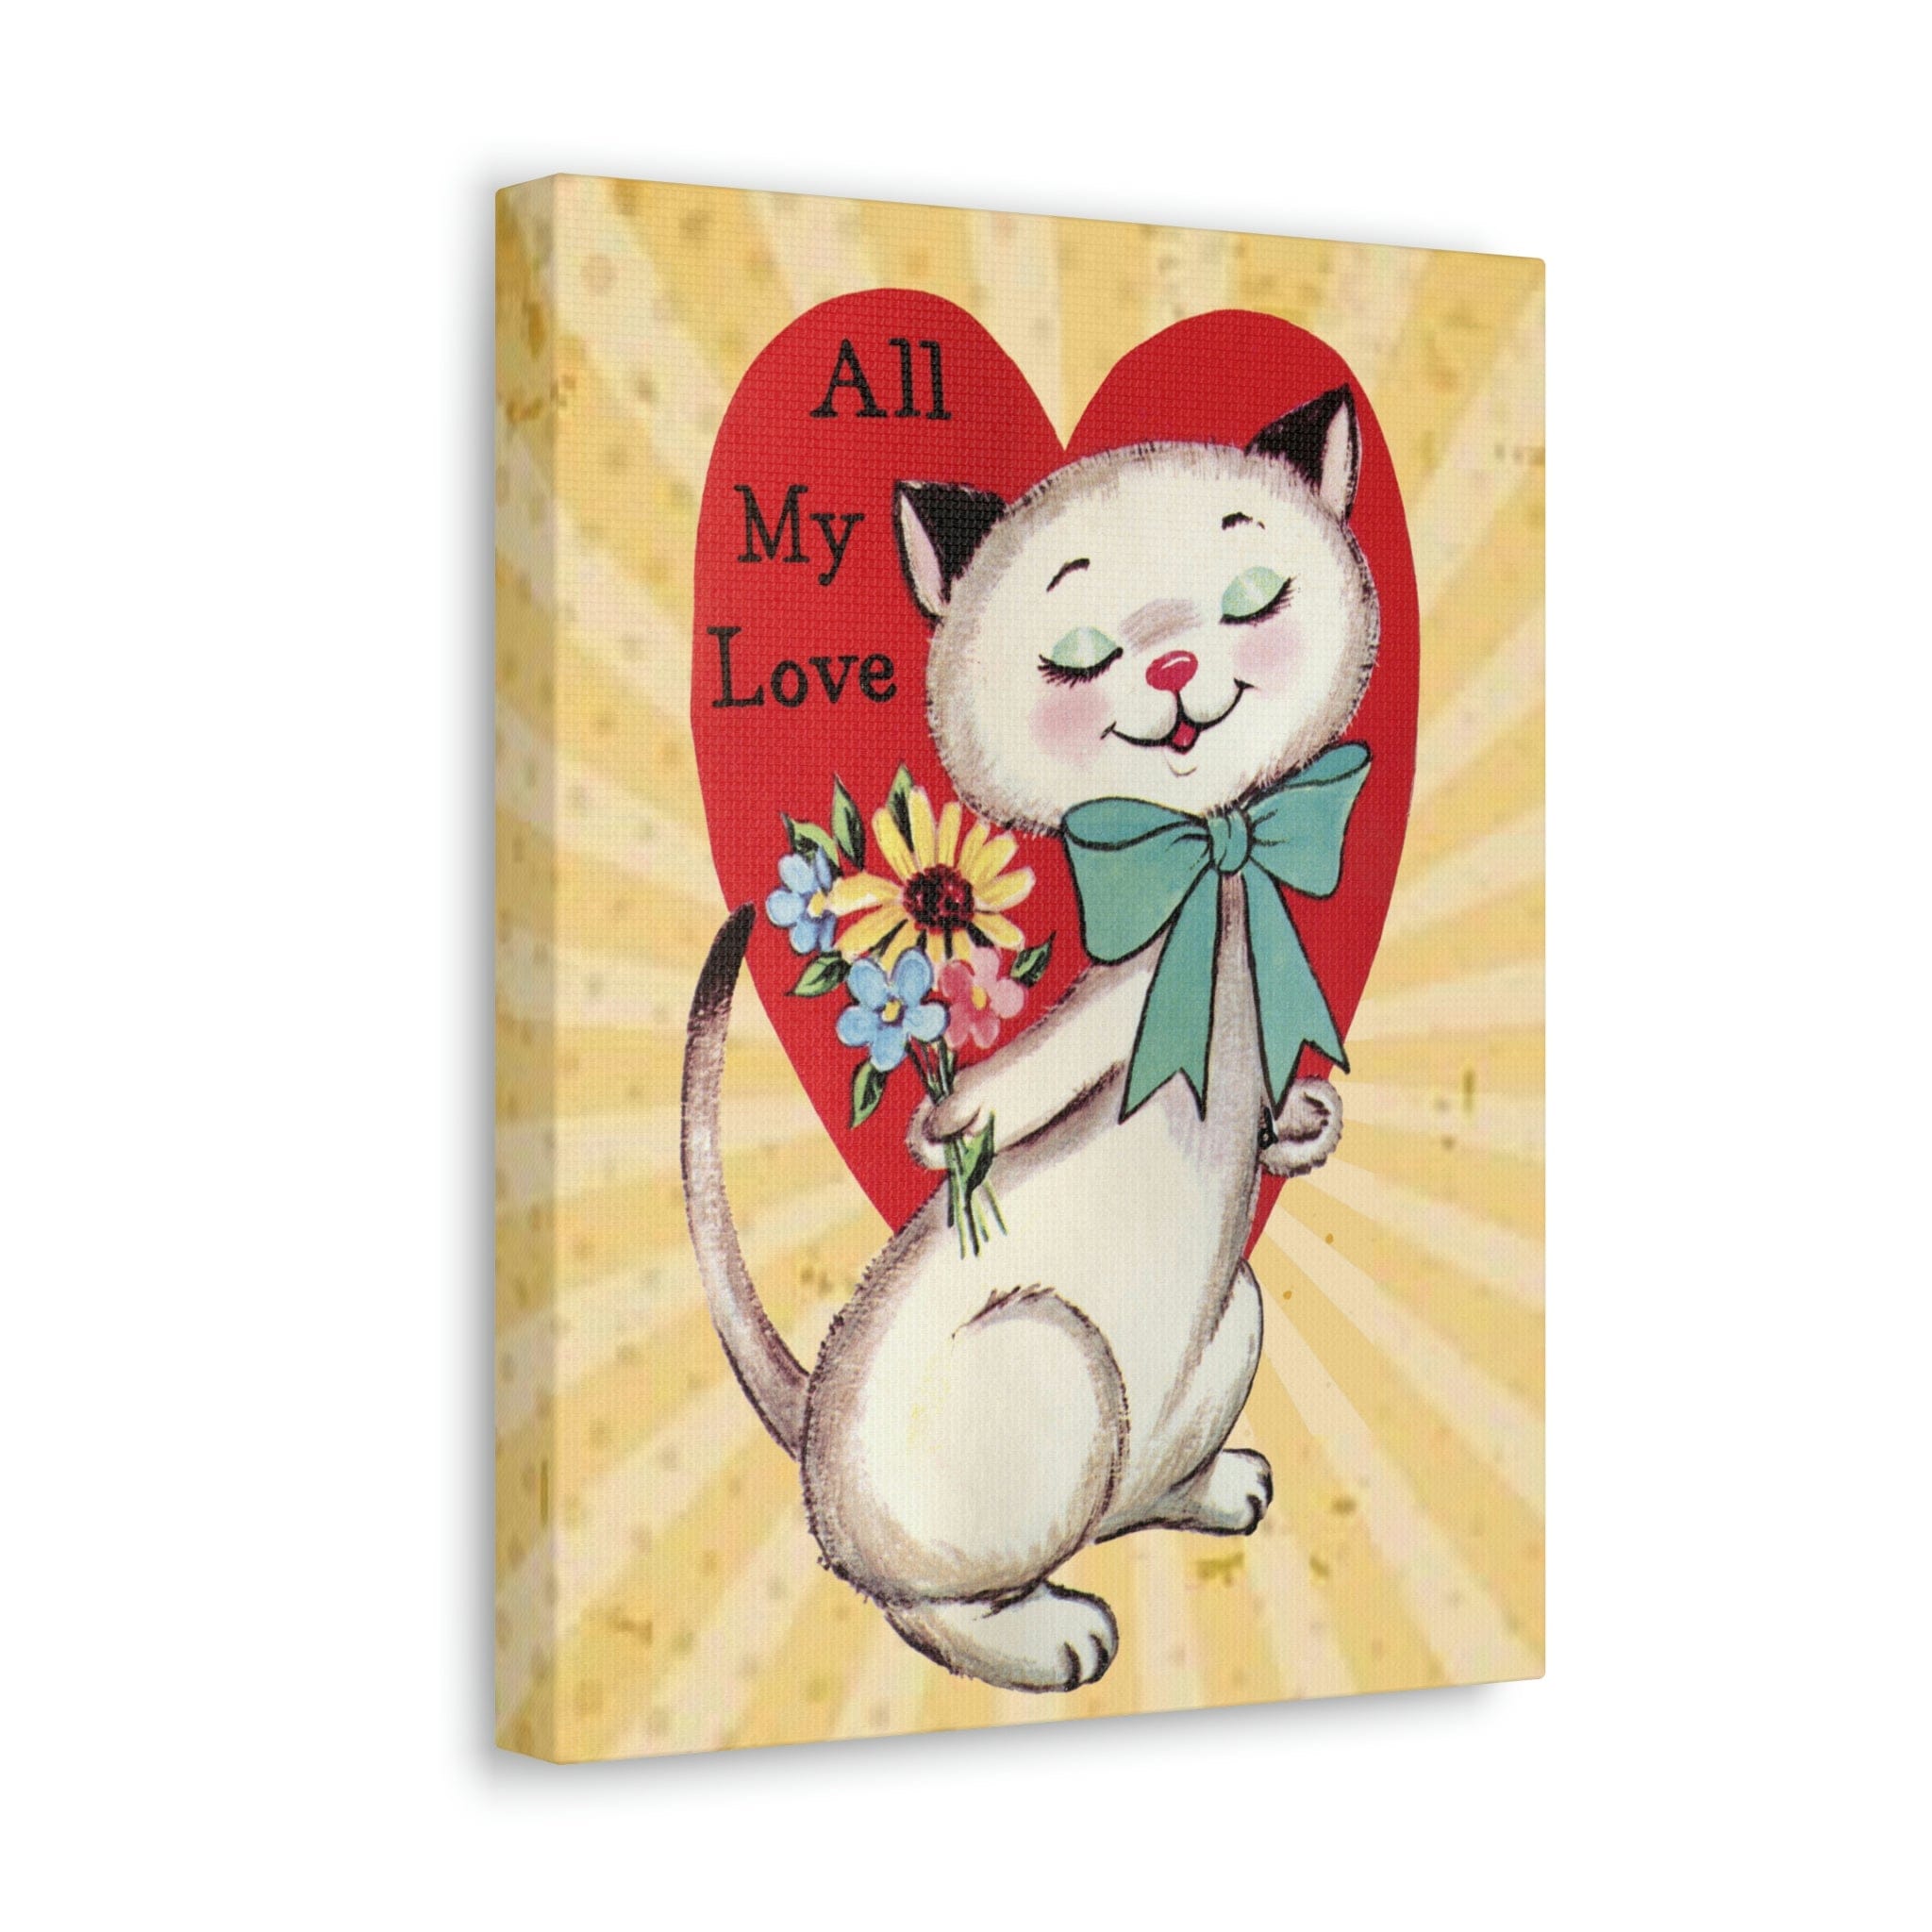 Kitschy Cute, Funny Retro Vintage Valentine Card Blanket Gift For Her -  7579703410843